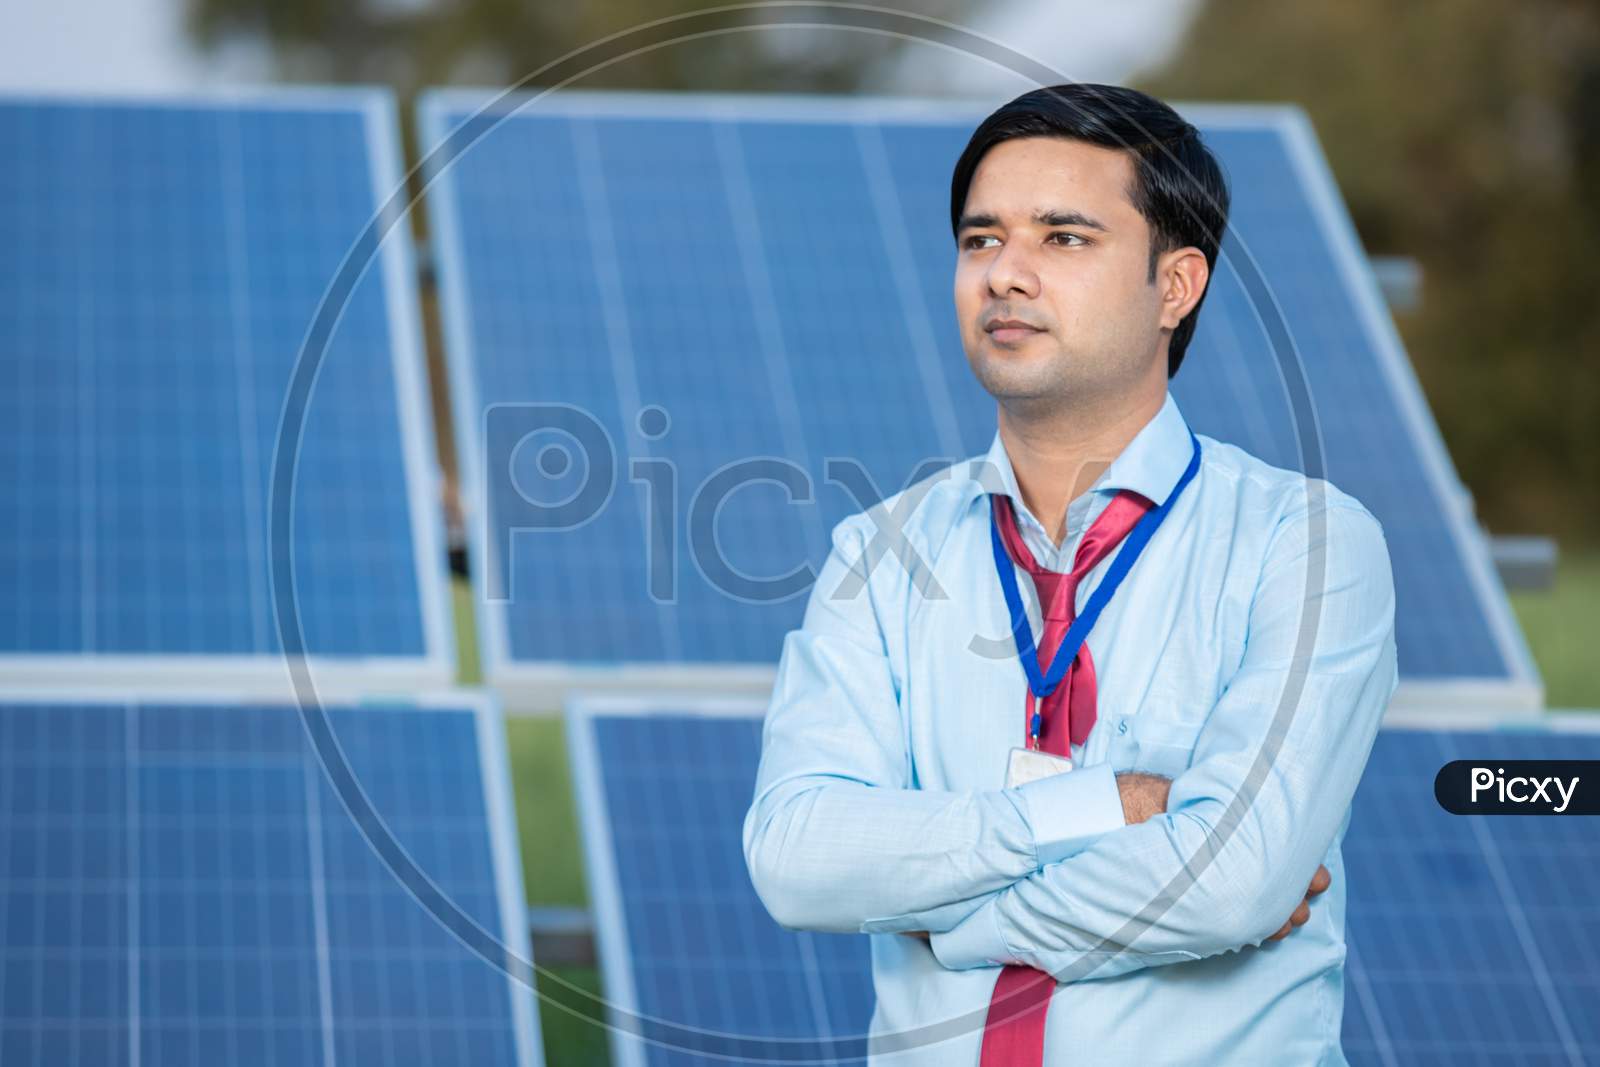 Portrait Young Indian Technician Or Manager Wearing Formal Cloths Standing With Solar Panel. Renewable Energy, Man Standing Crossed Arm, Copy Space.